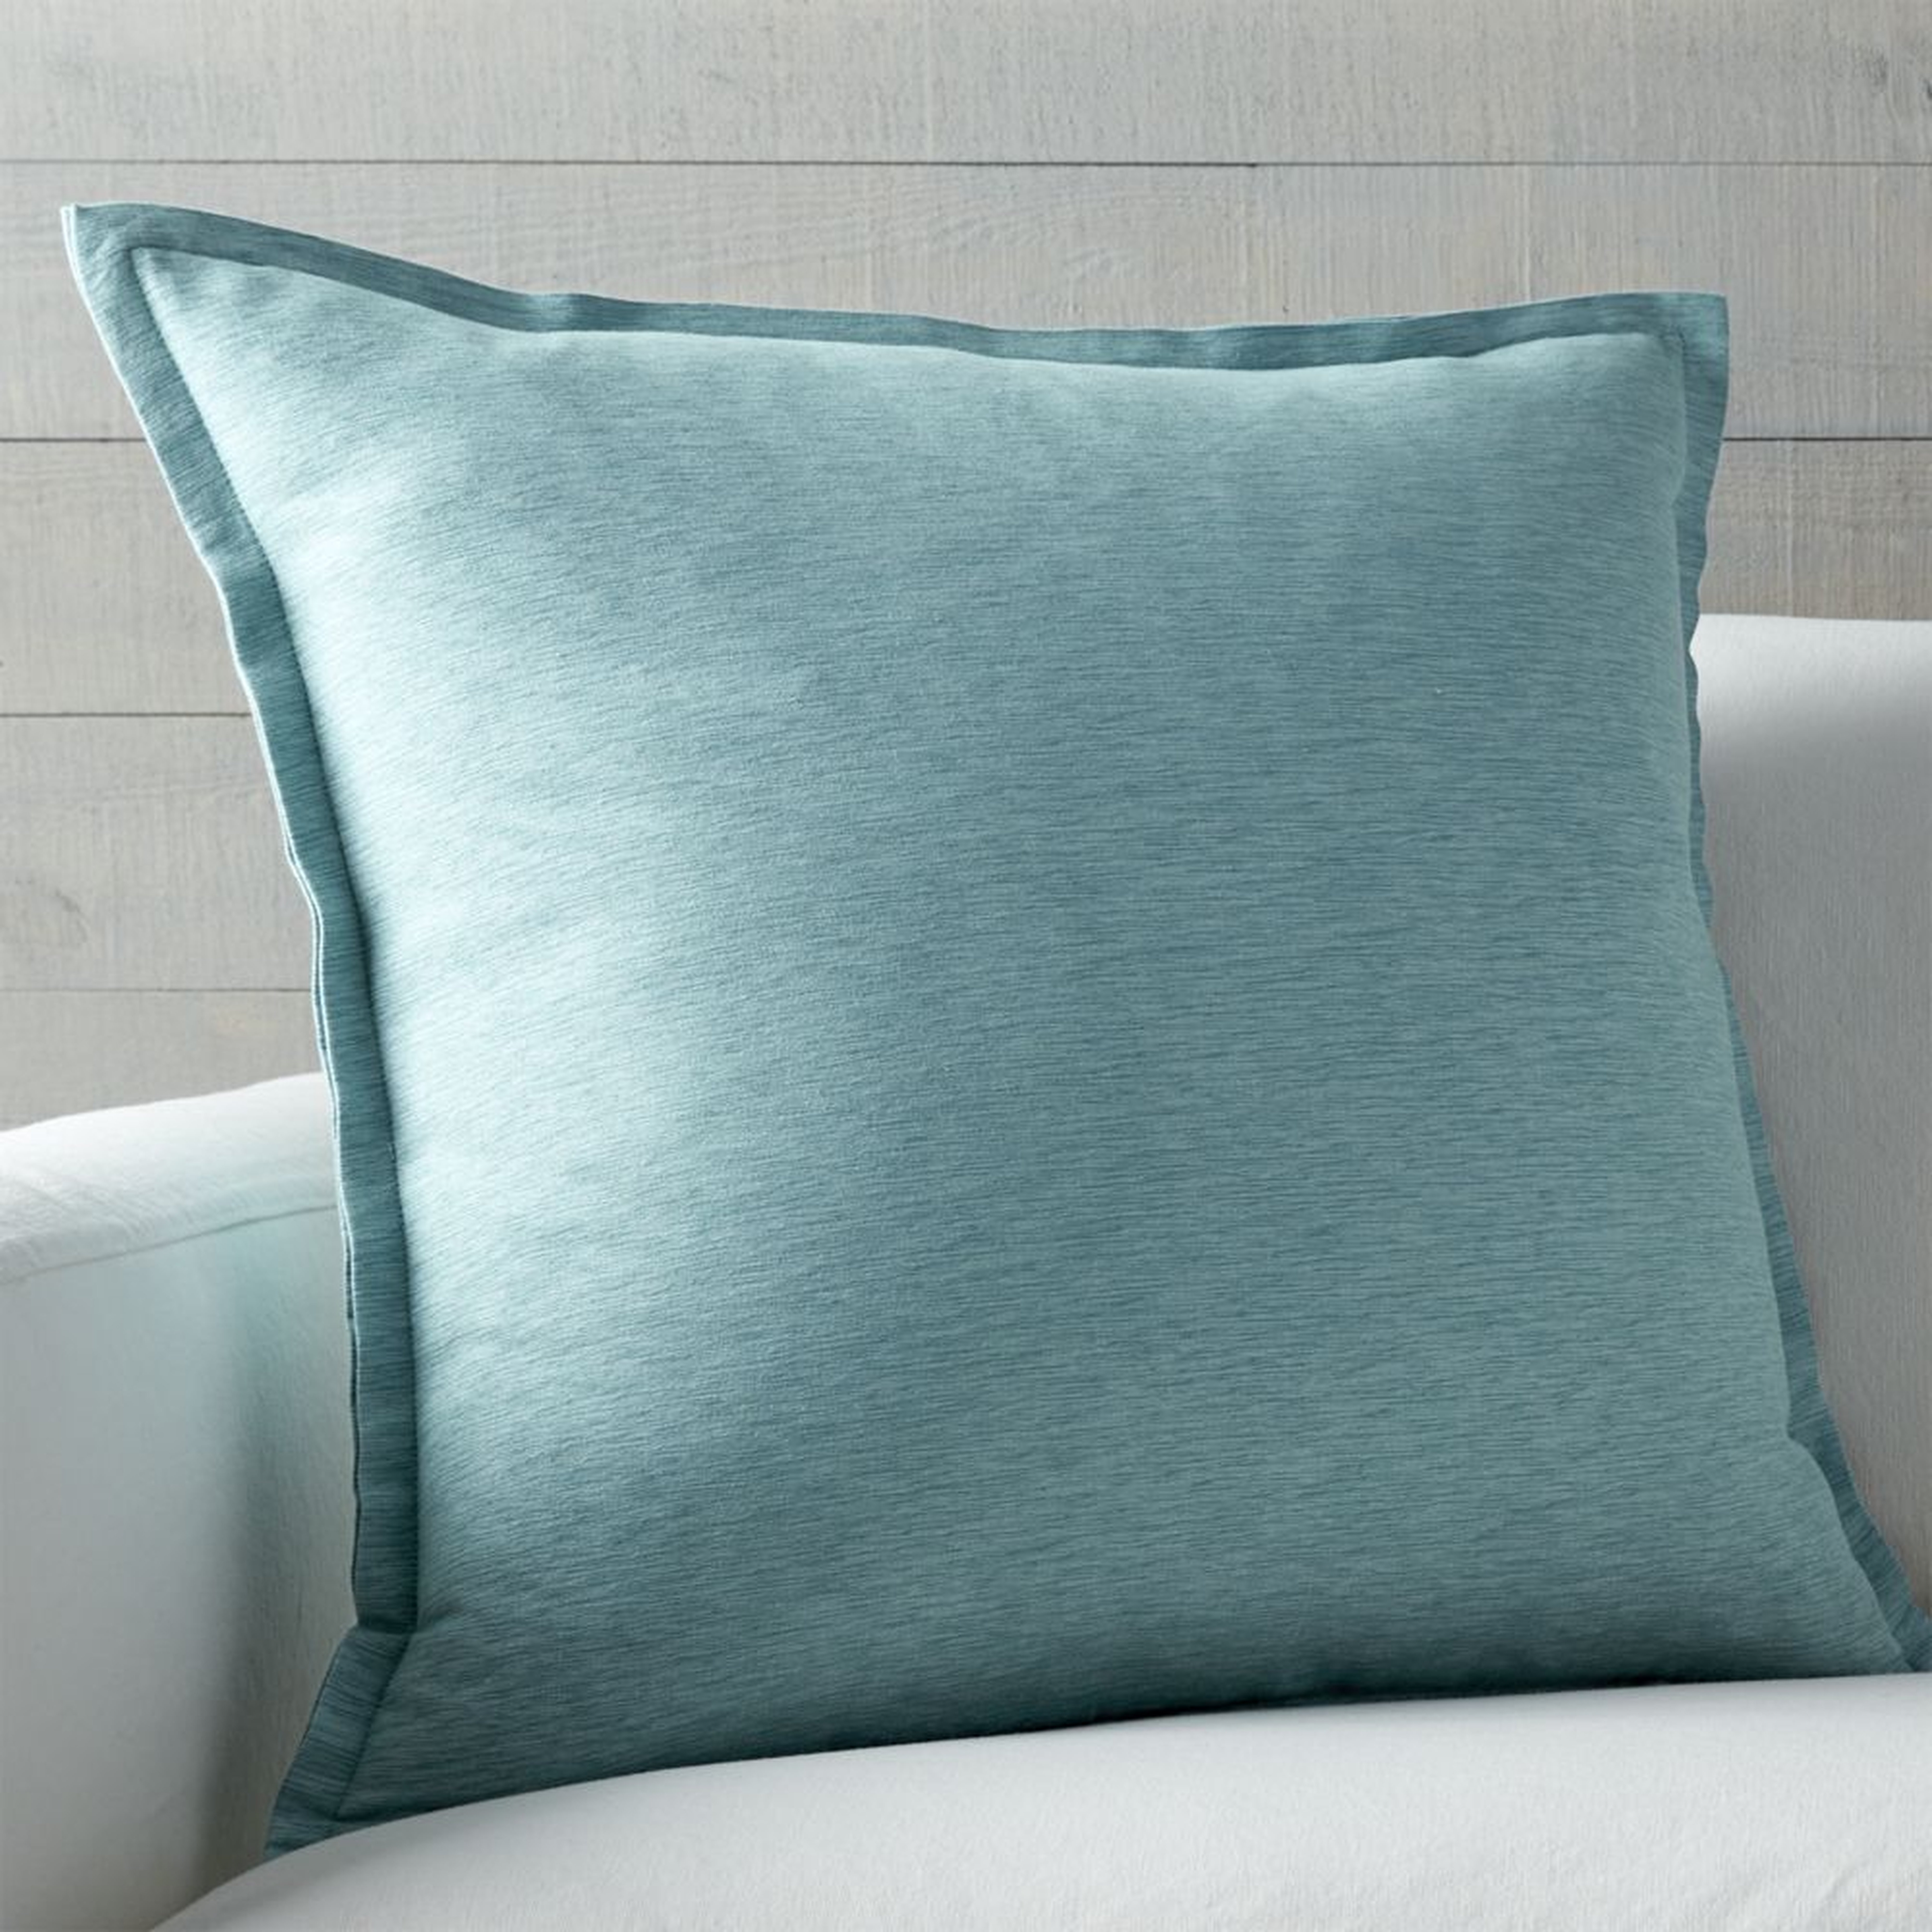 Linden Ocean 23" Pillow with Down-Alternative Insert - Crate and Barrel